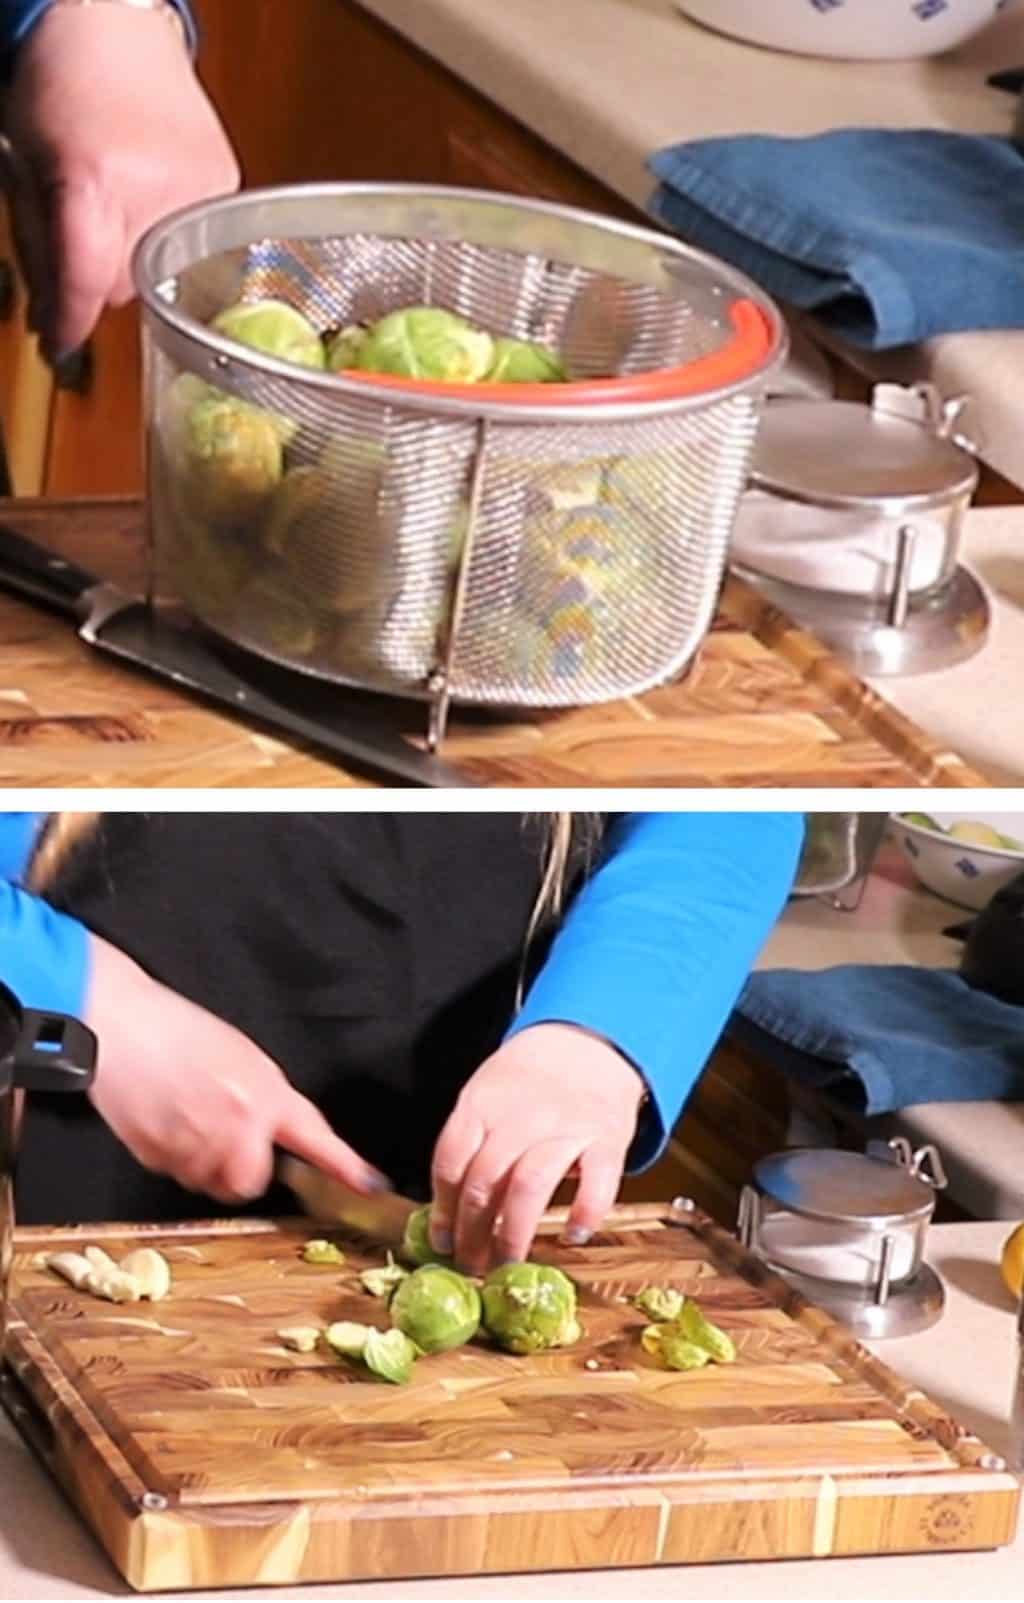 Prepare Brussels Sprouts by Washing and Cutting in Half